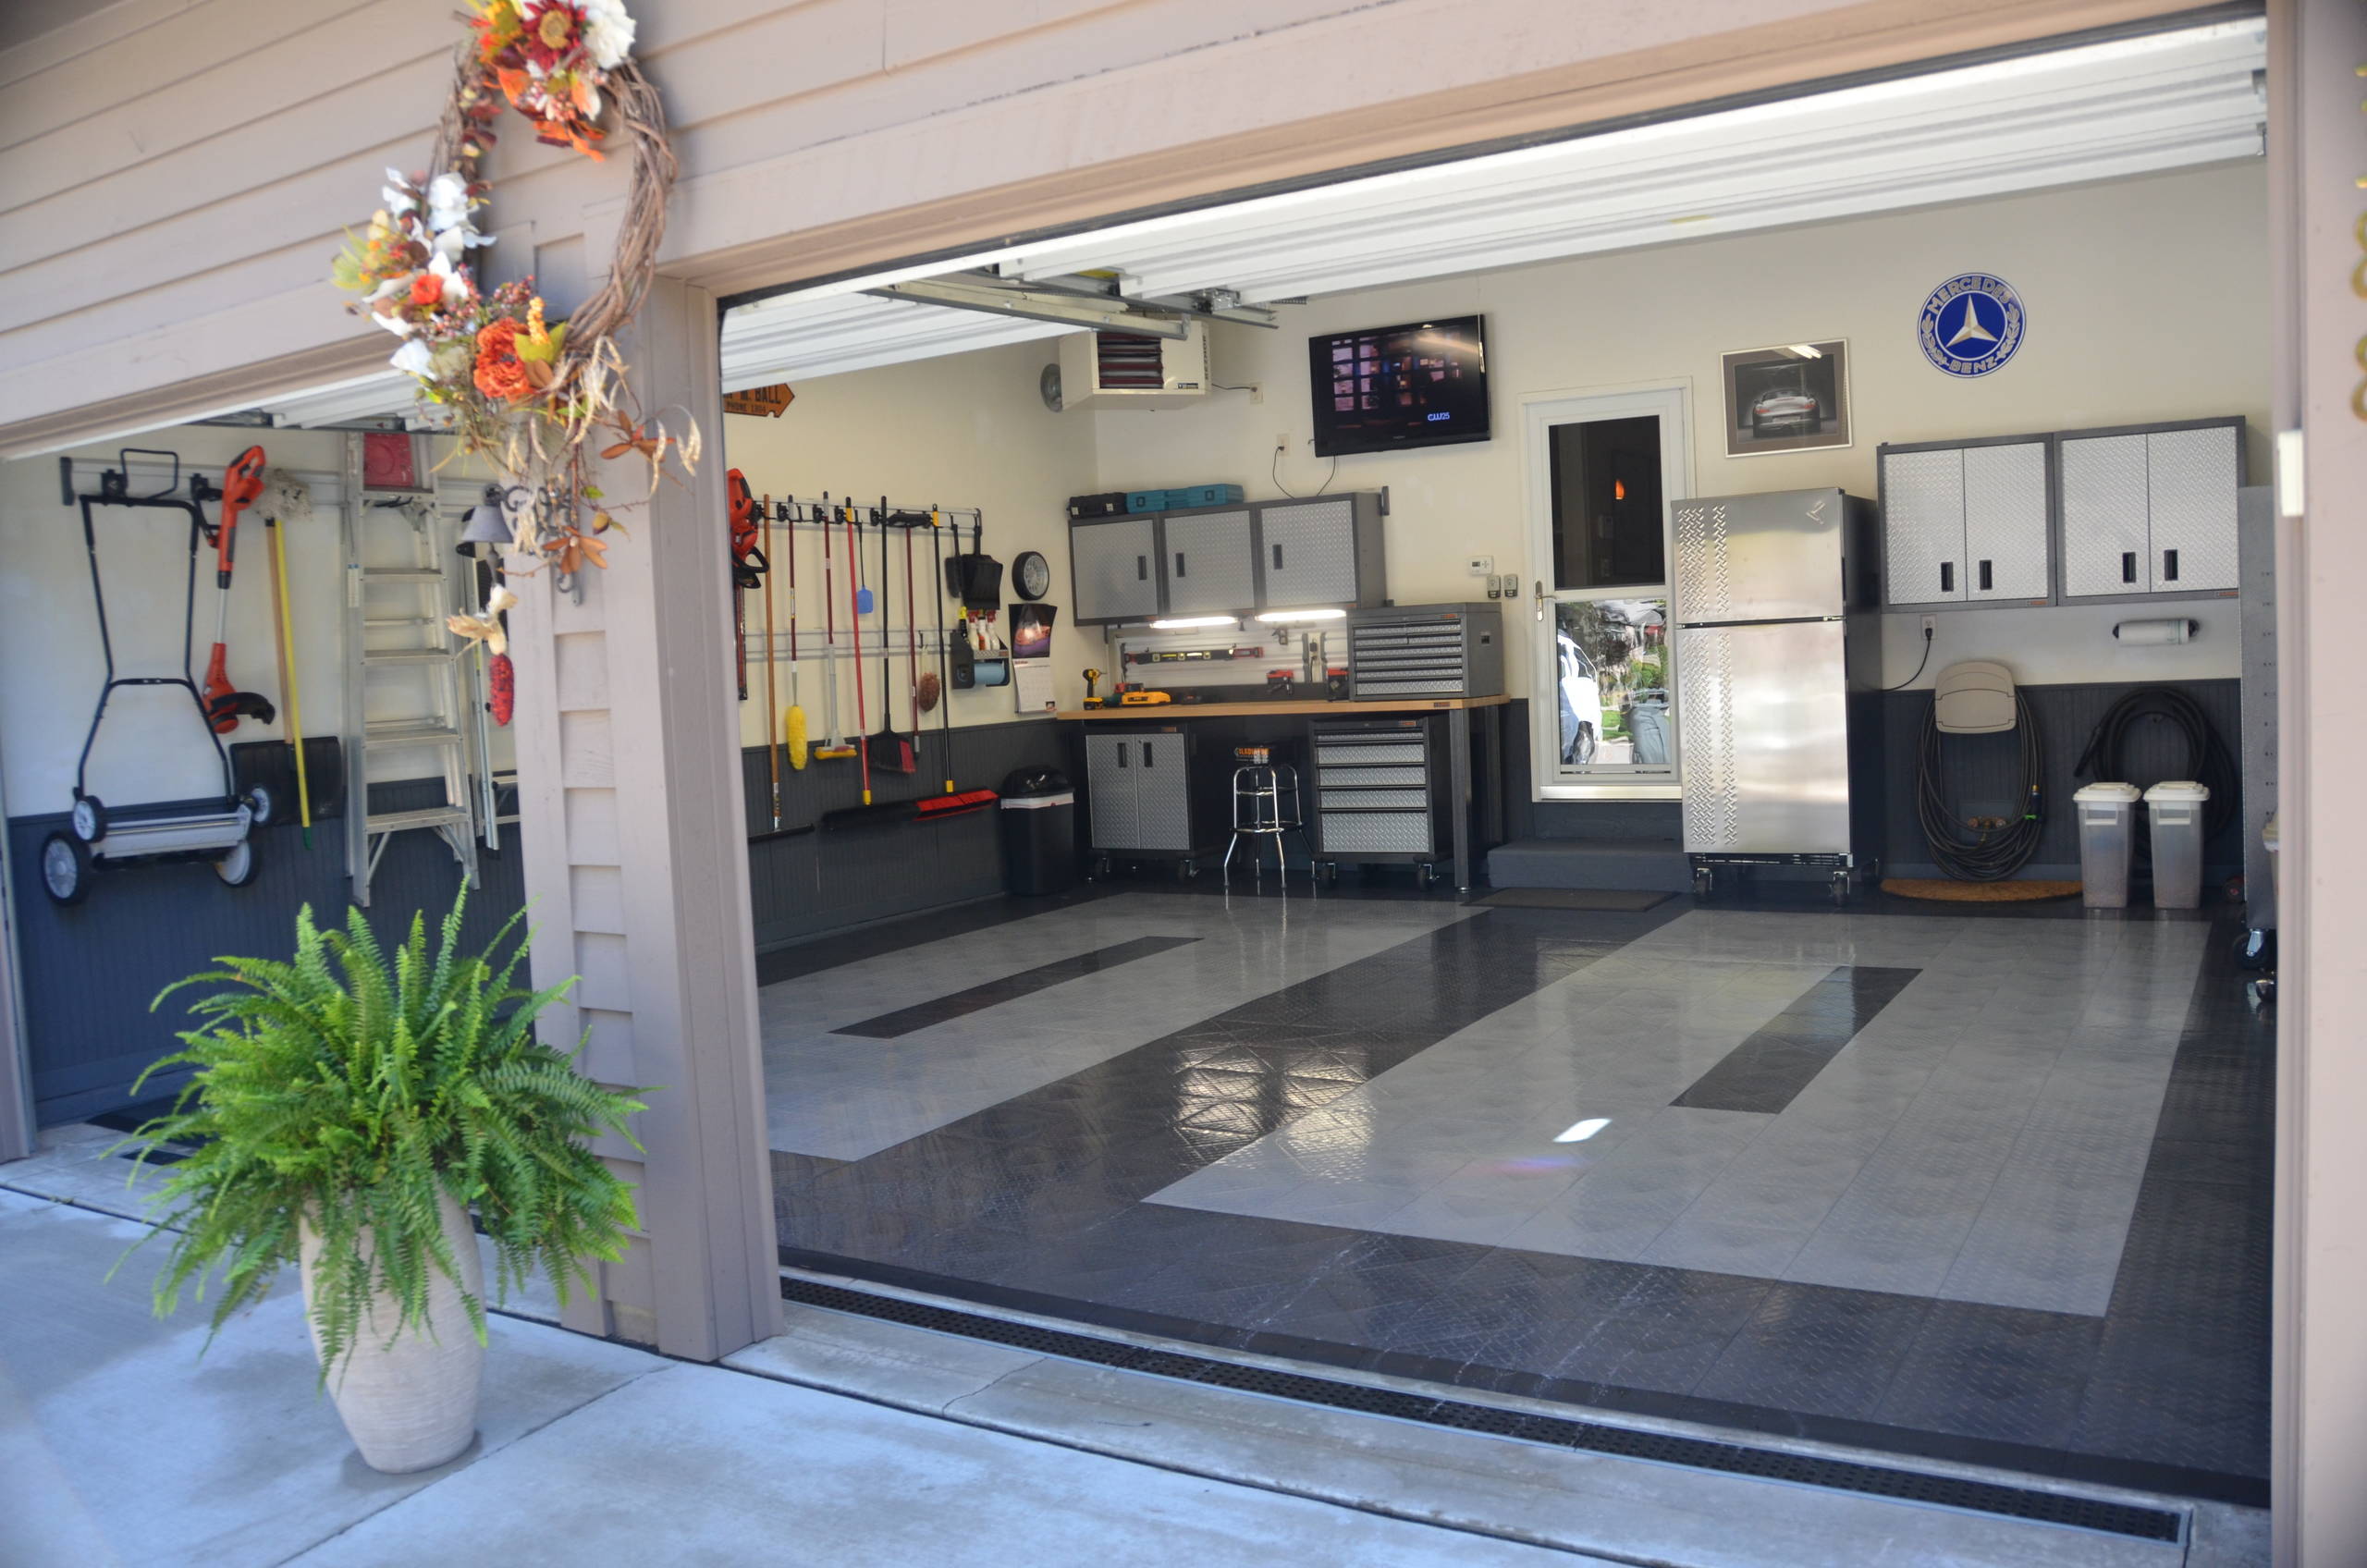 Great looking garage with RaceDeck garage flooring by race deck -  Traditional - Shed - Salt Lake City - by RaceDeck | Houzz